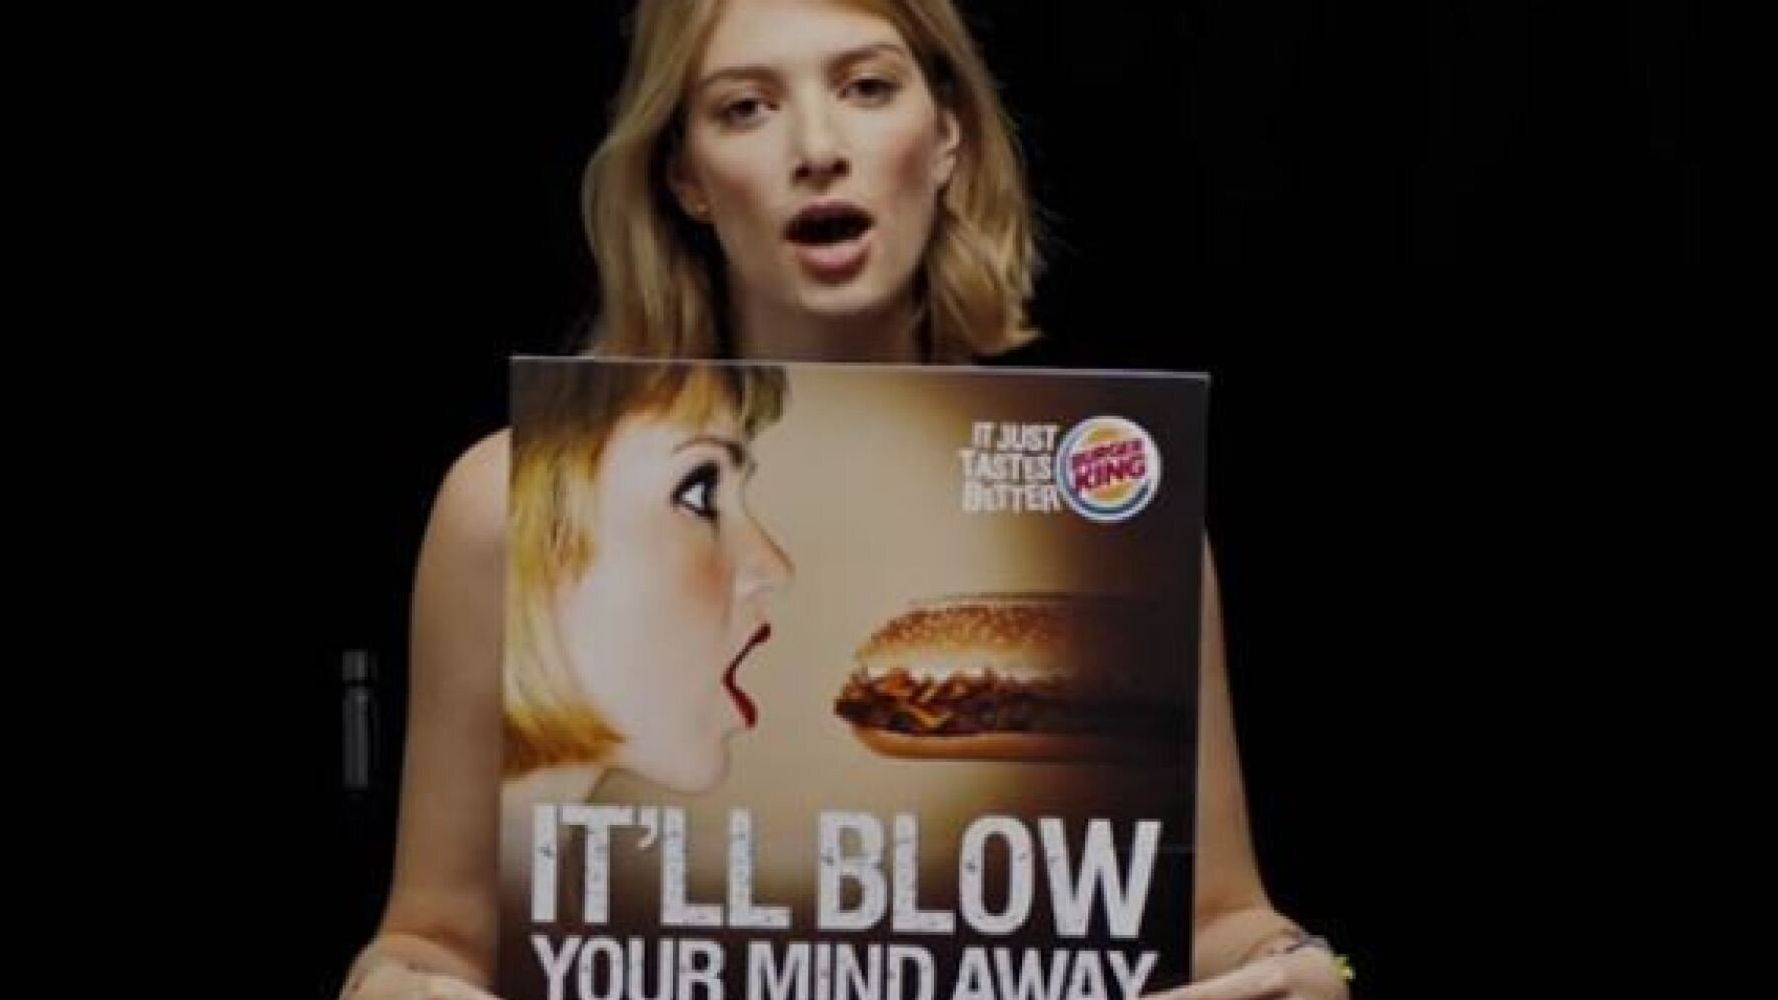 Powerful Women Not Objects Campaign Calls On Advertisers To Stop 7282